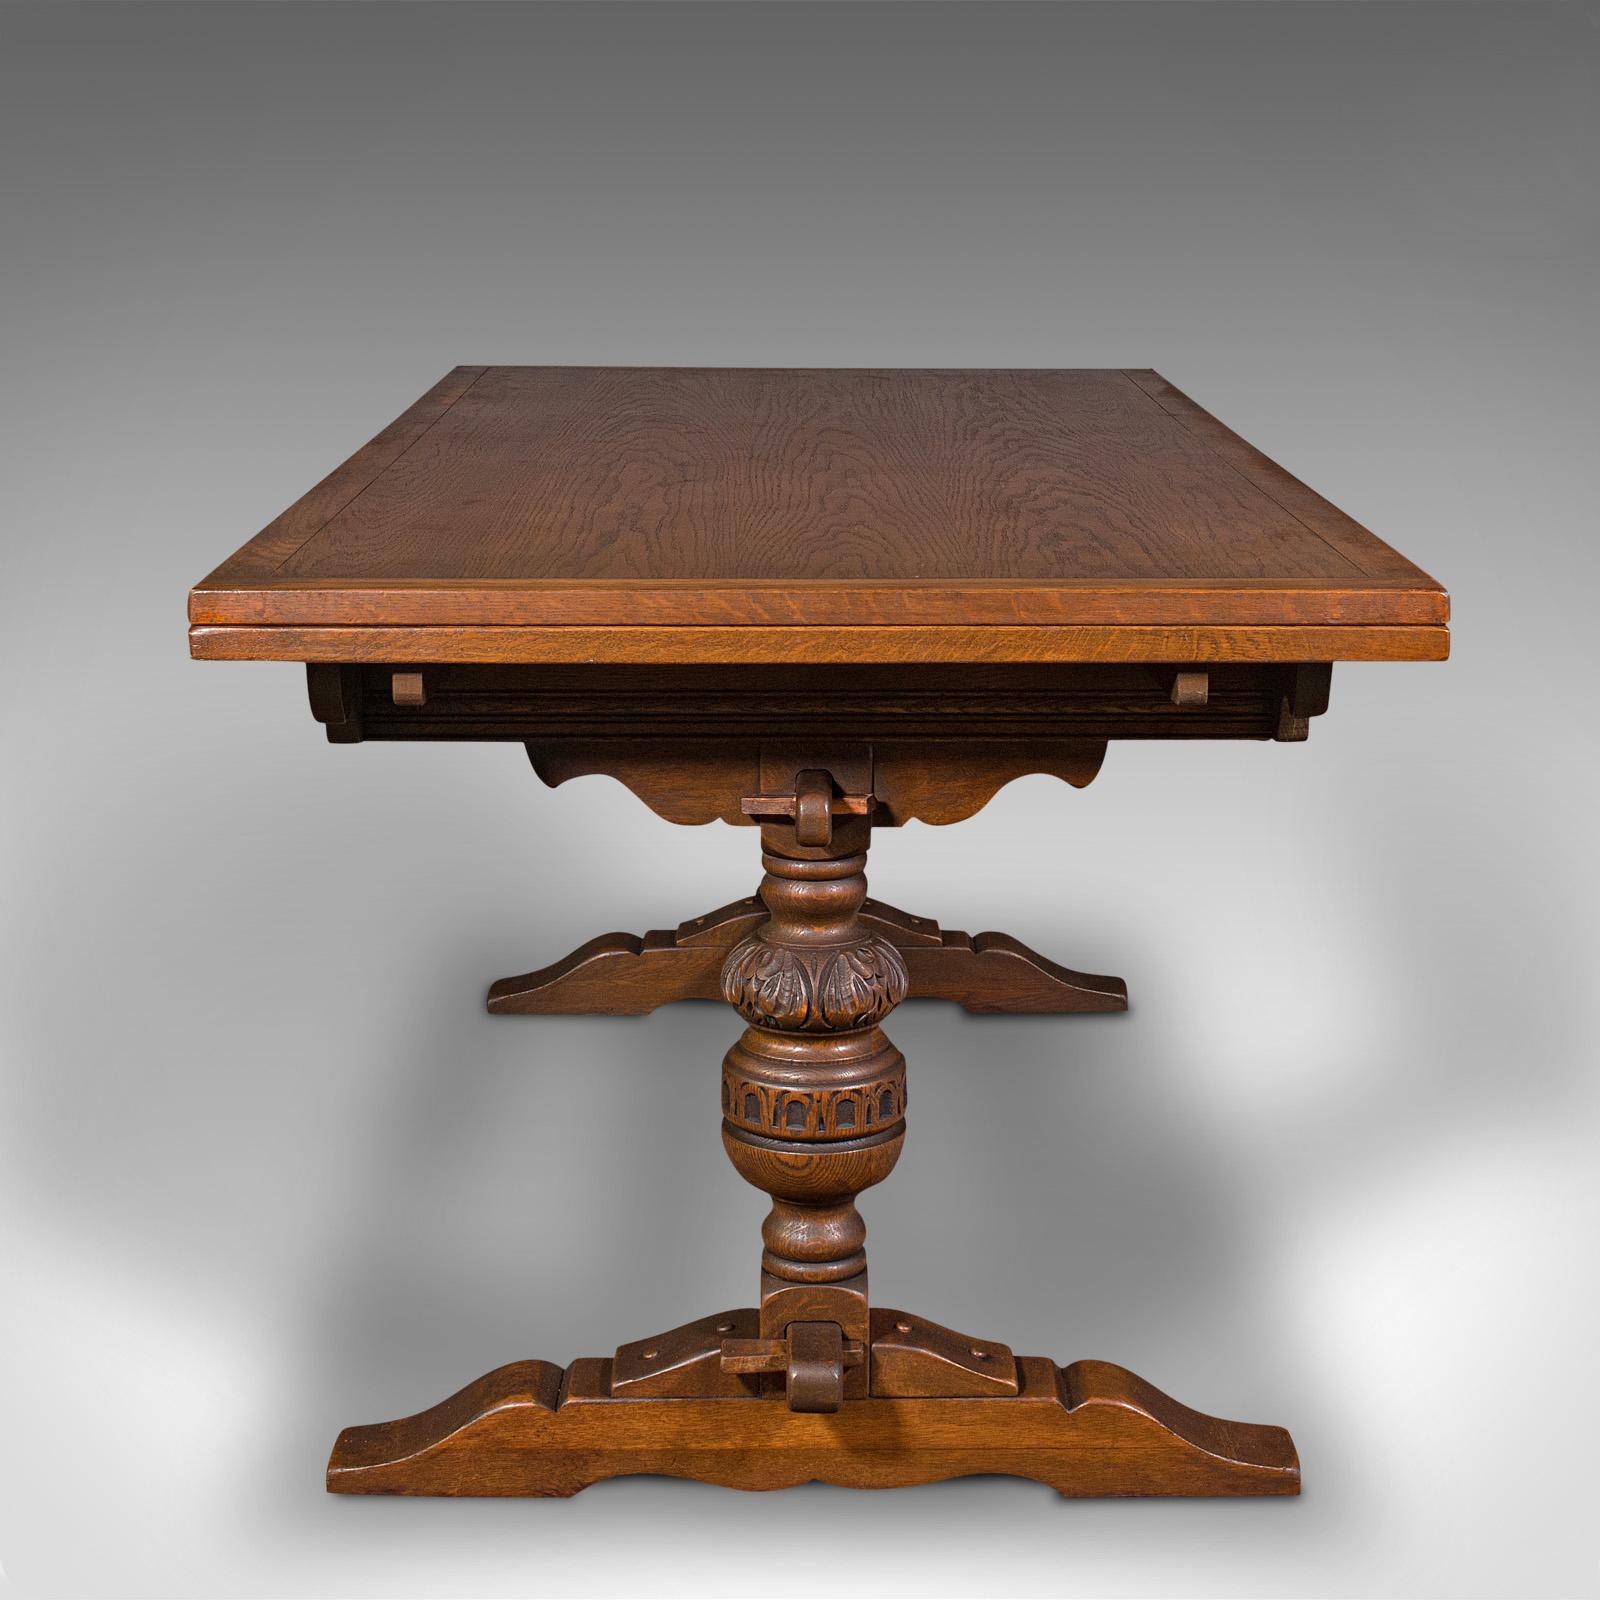 20th Century Antique Extending Dining Table, English, Oak, 6-8 Seat, Country House, Edwardian